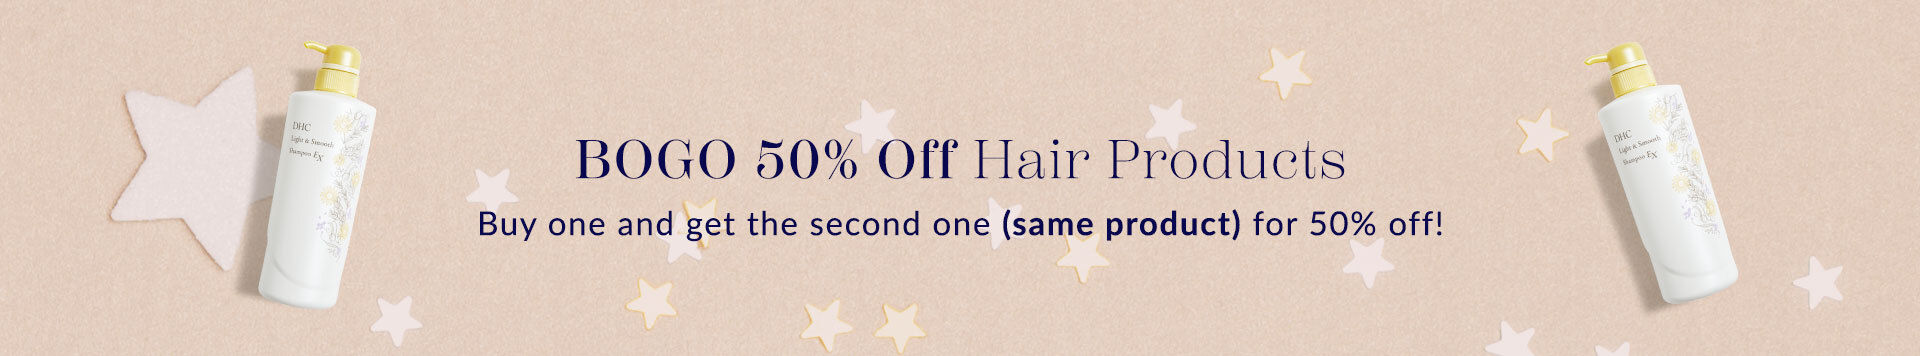 BOGO Hair Products